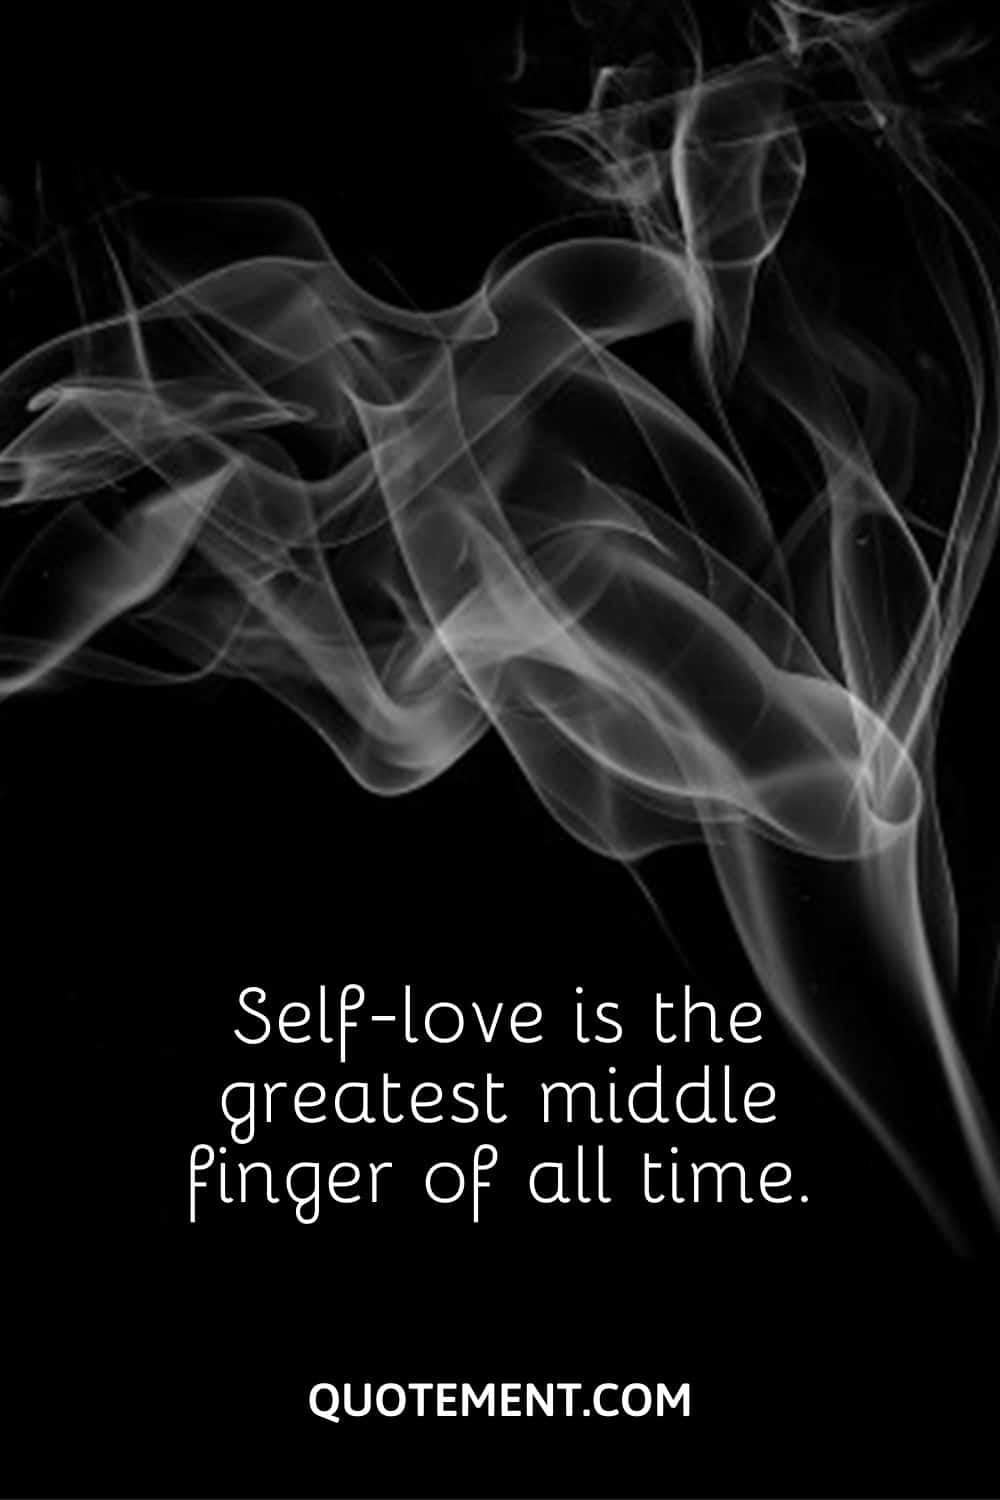 Self-love is the greatest middle finger of all time.